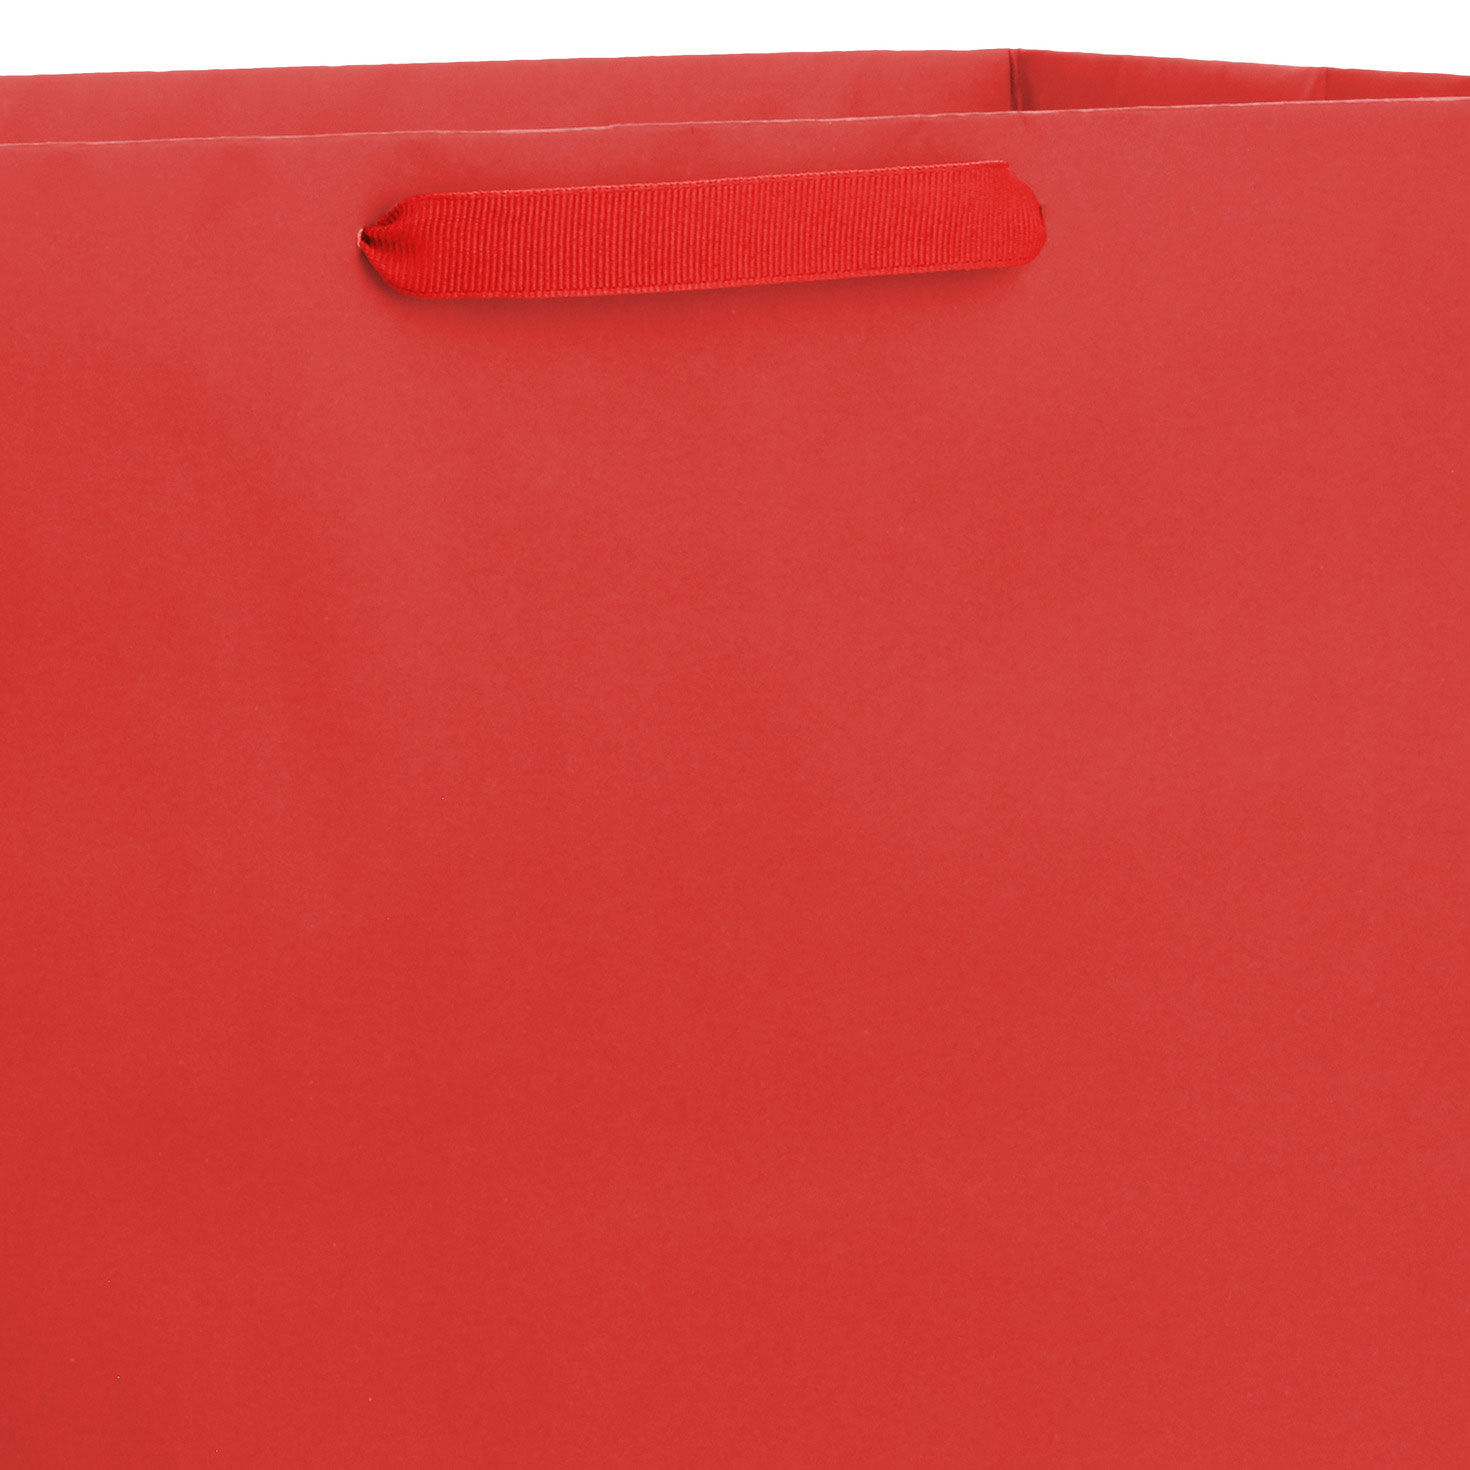 15" Red Extra-Deep Gift Bag for only USD 5.49 | Hallmark